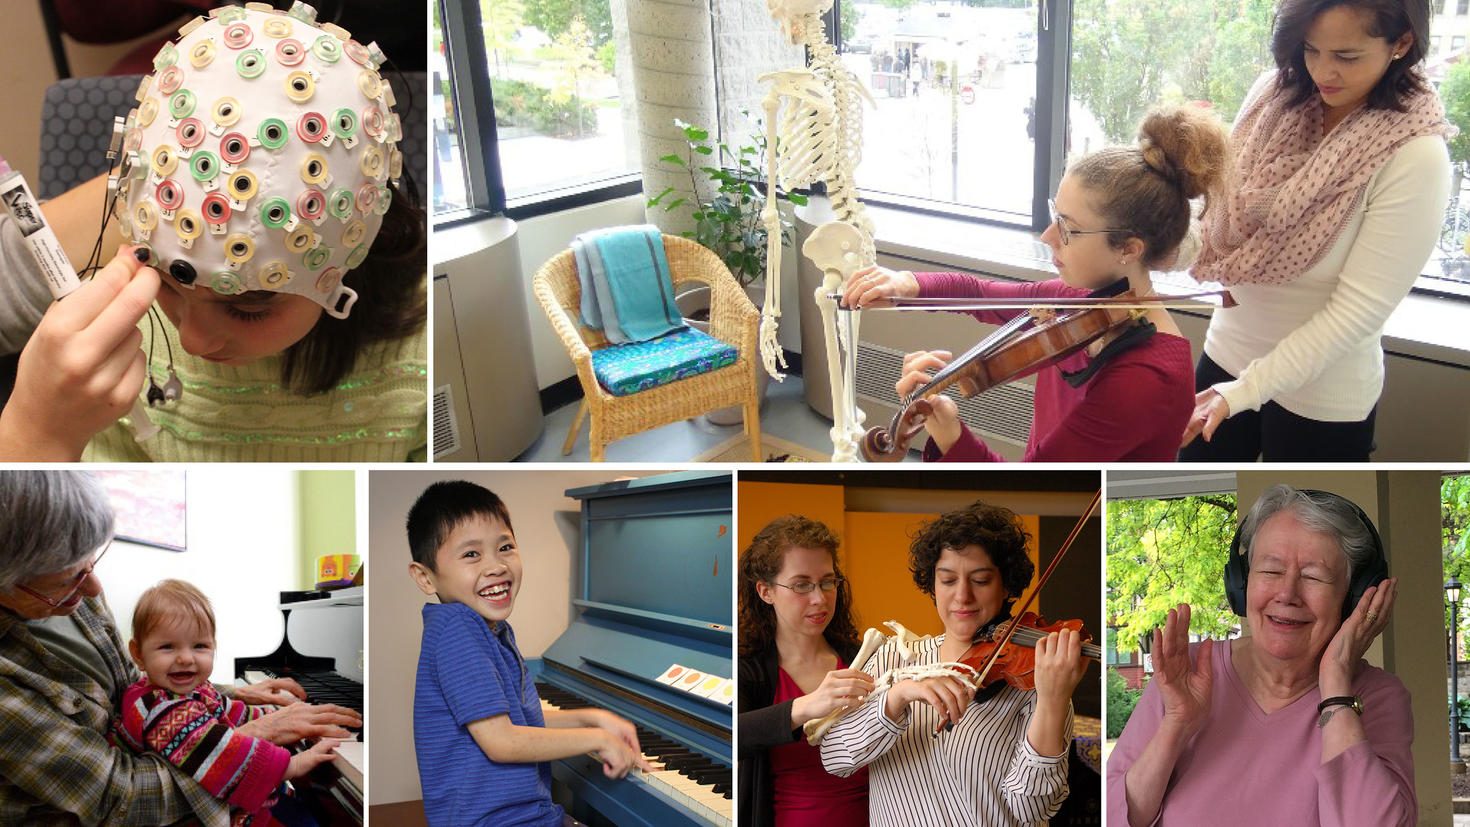 A photo montage showing the benefits of music and music therapy on physical, sensory, cognitive and mental health